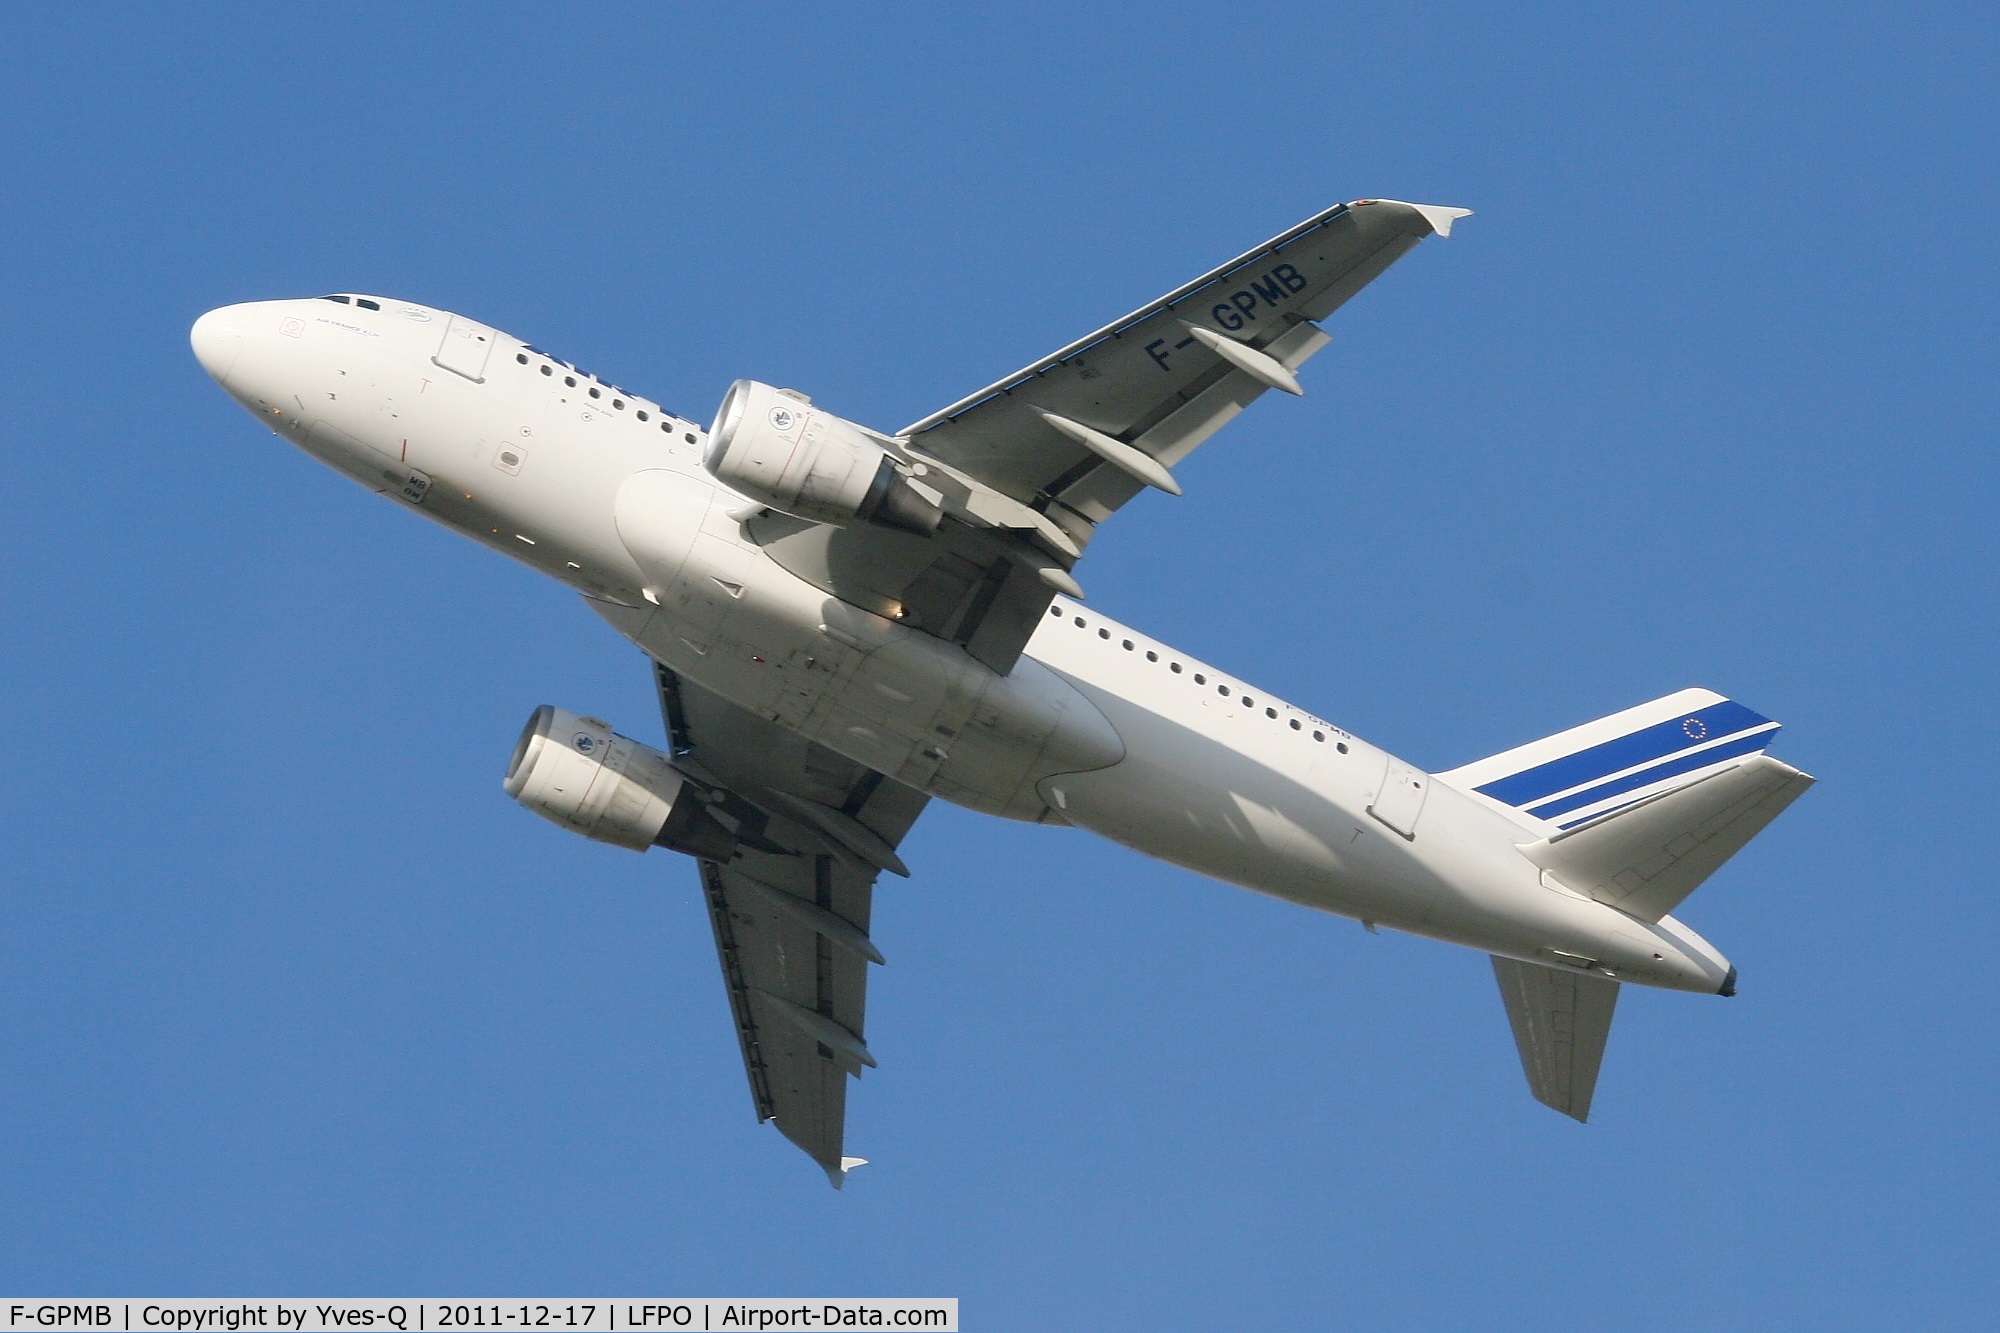 F-GPMB, 1996 Airbus A319-113 C/N 600, Airbus A319-113, Take off rwy 26, Paris Orly Airport (LFPO-ORY)